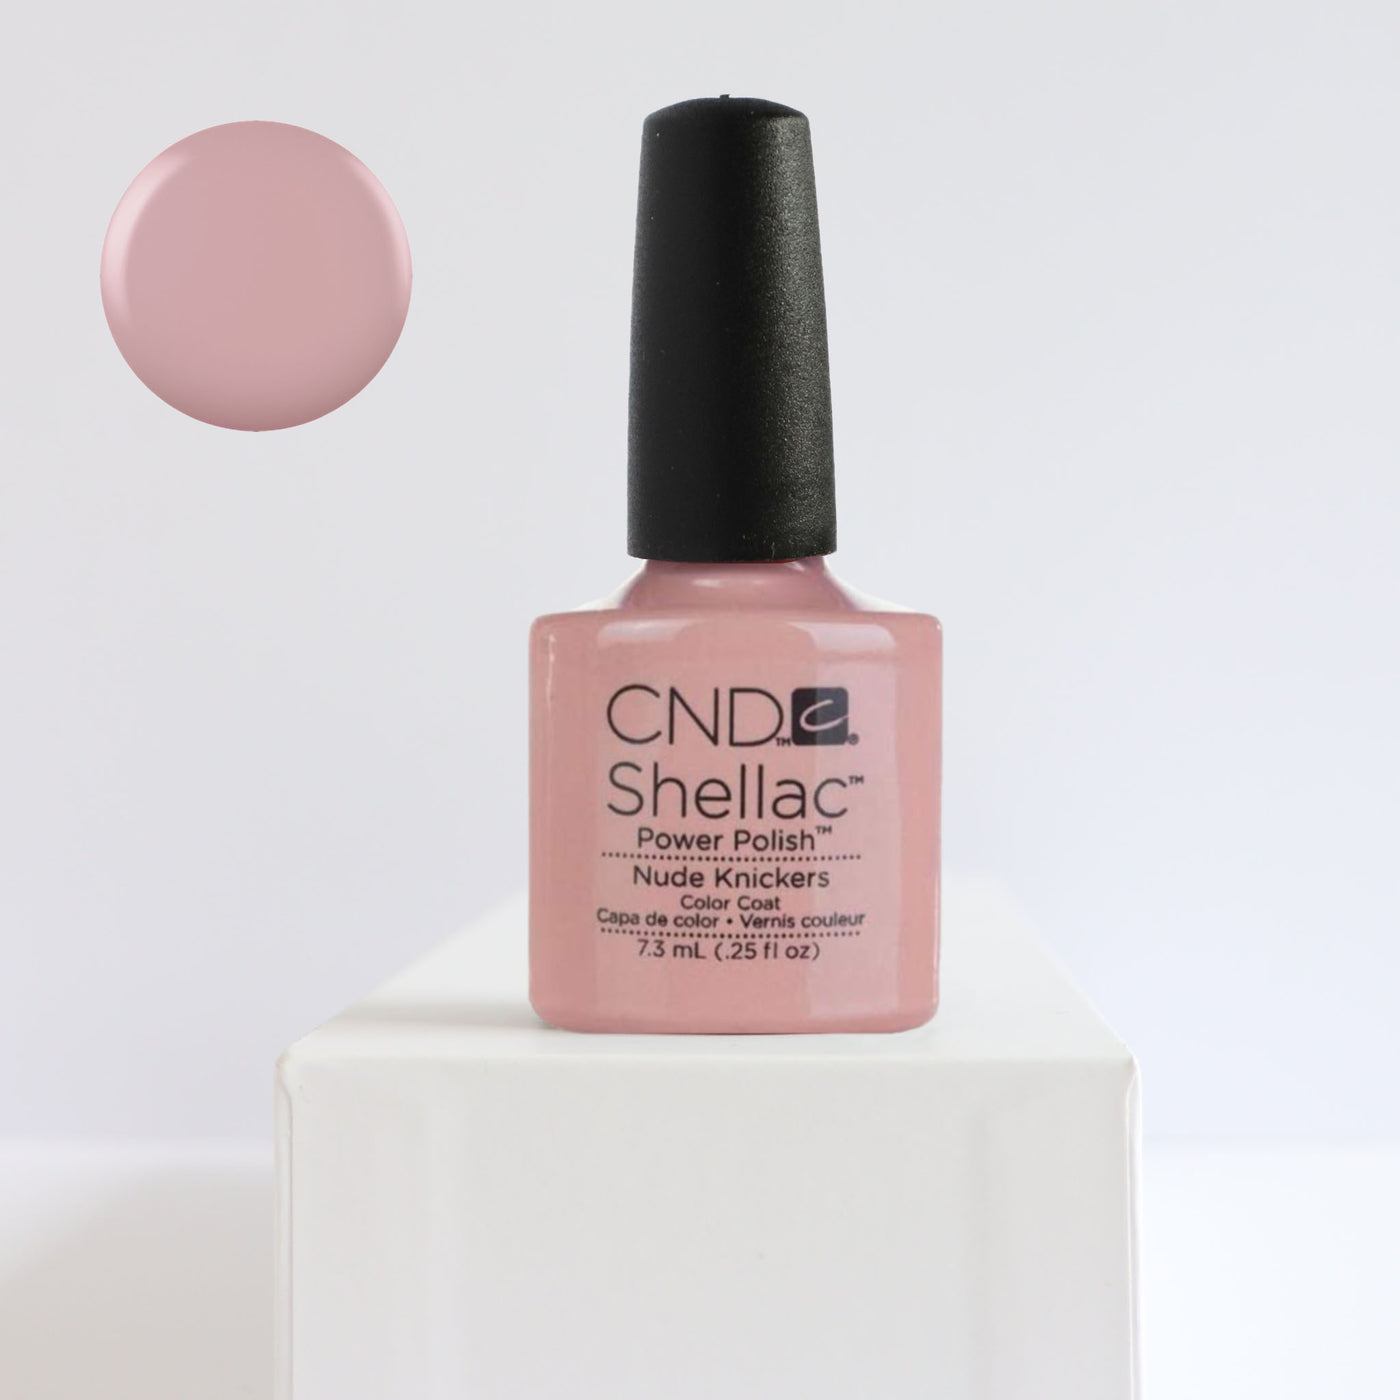 CND Shellac Nude Knickers 7.3ml